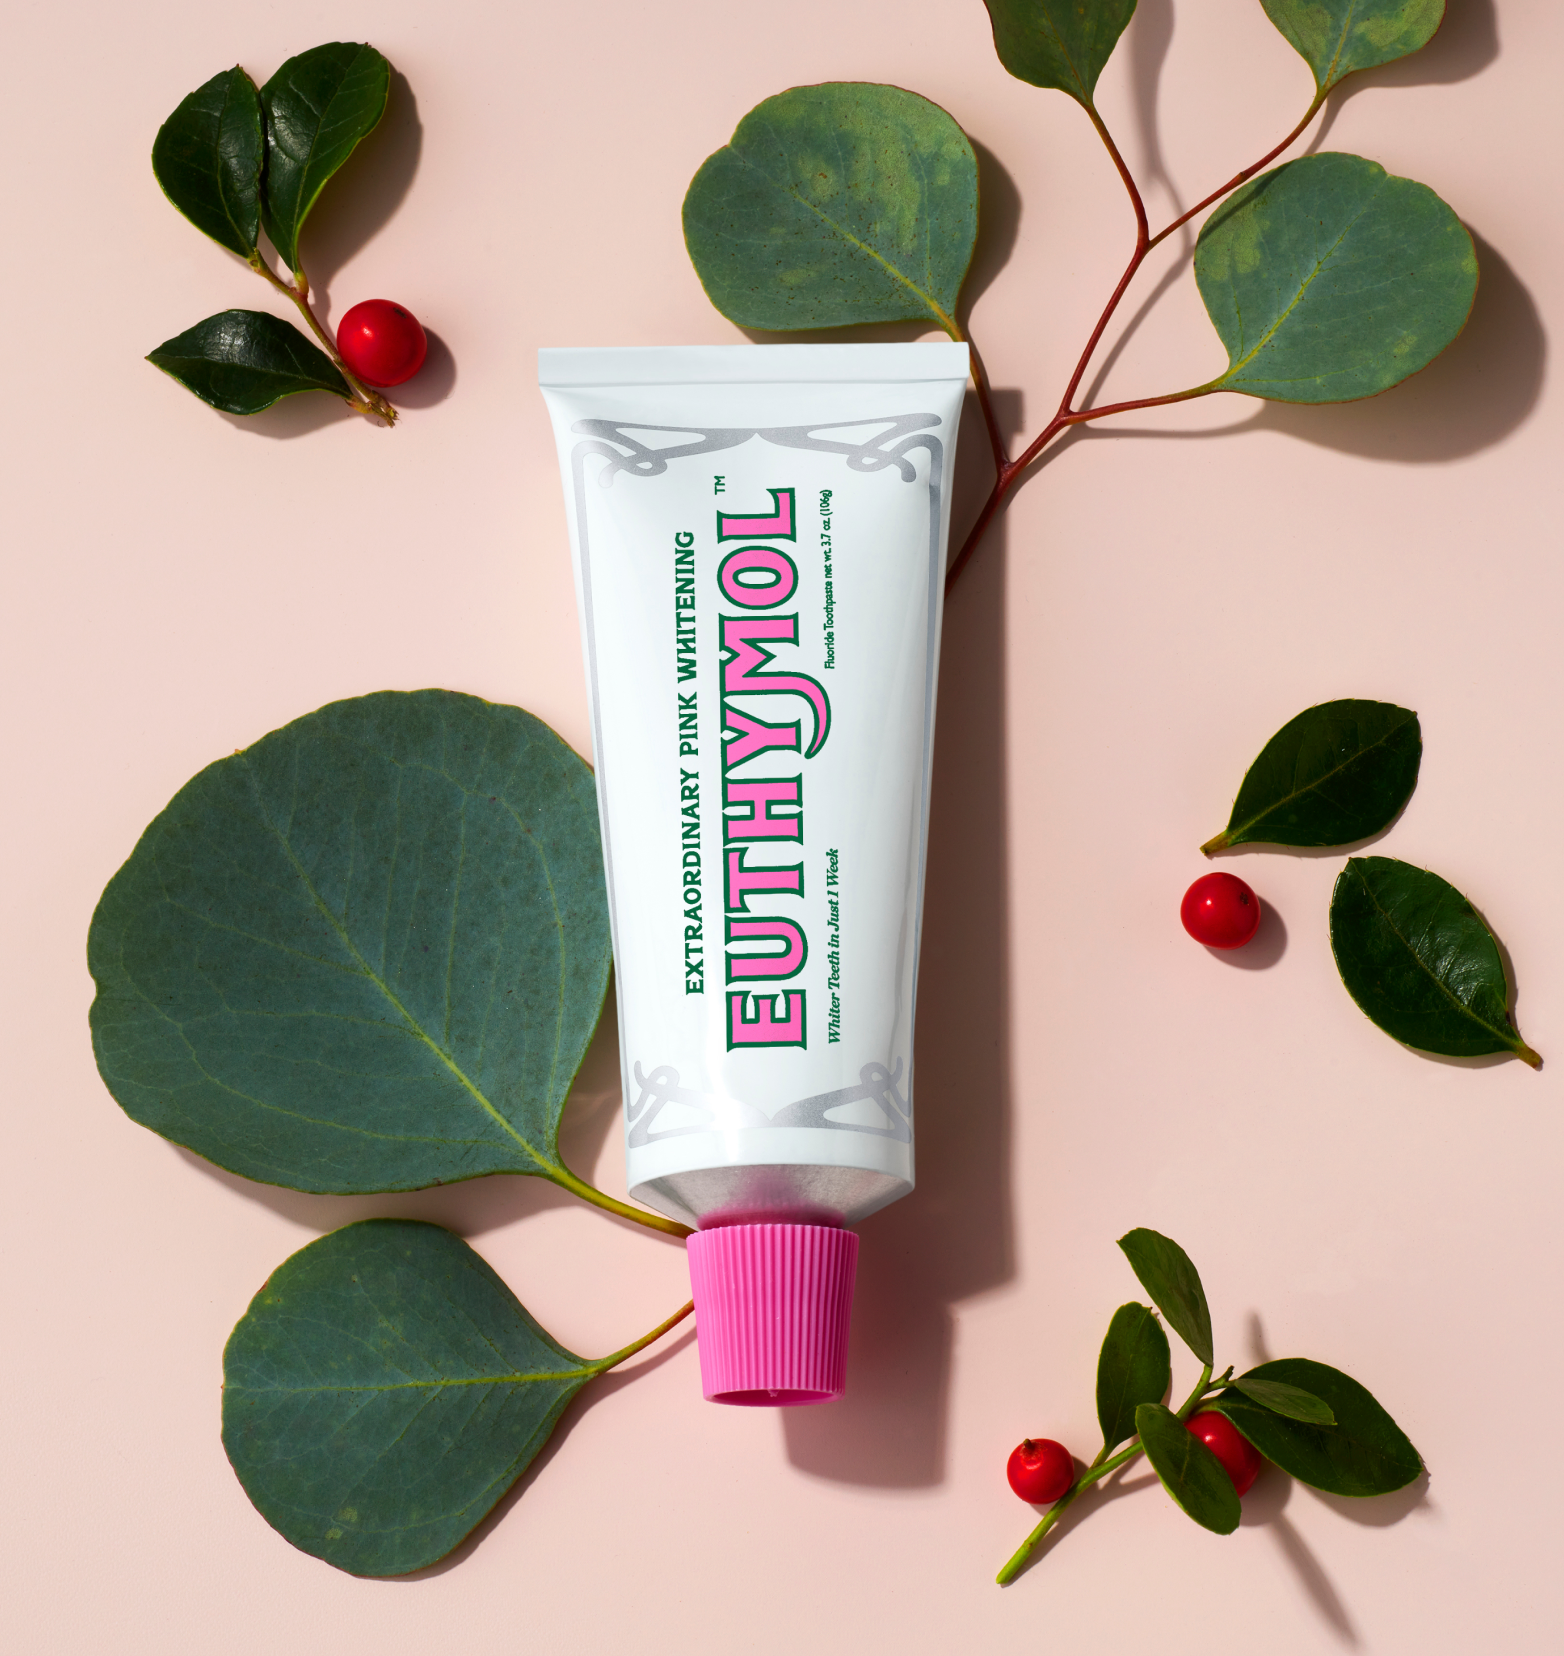 A white tube of Euthymol Whitening Toothpaste, lying on a light pink surface with leaves and cranberries around.